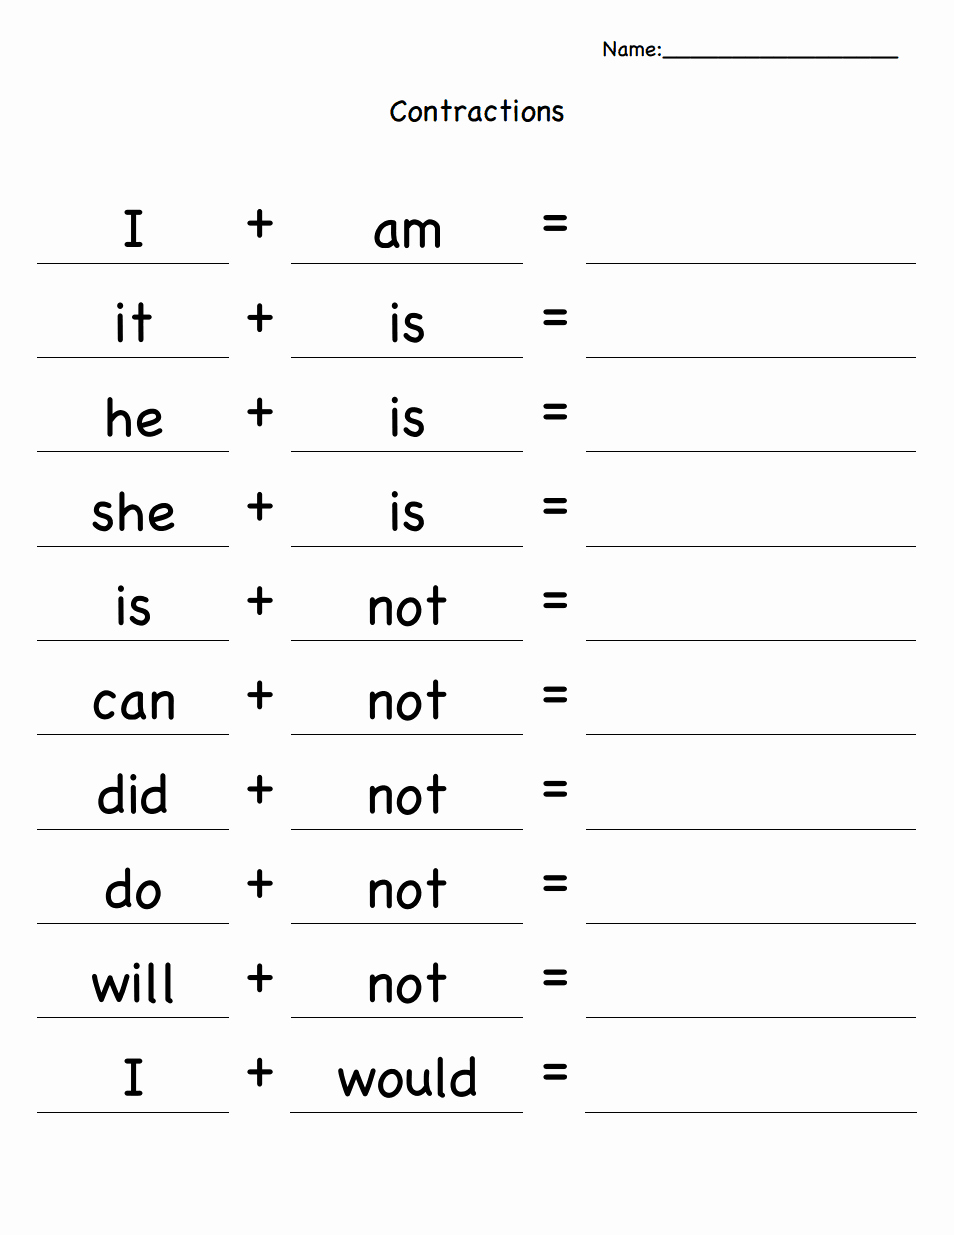 2nd Grade Grammar Worksheets Pdf Best Of Contractions Pdf